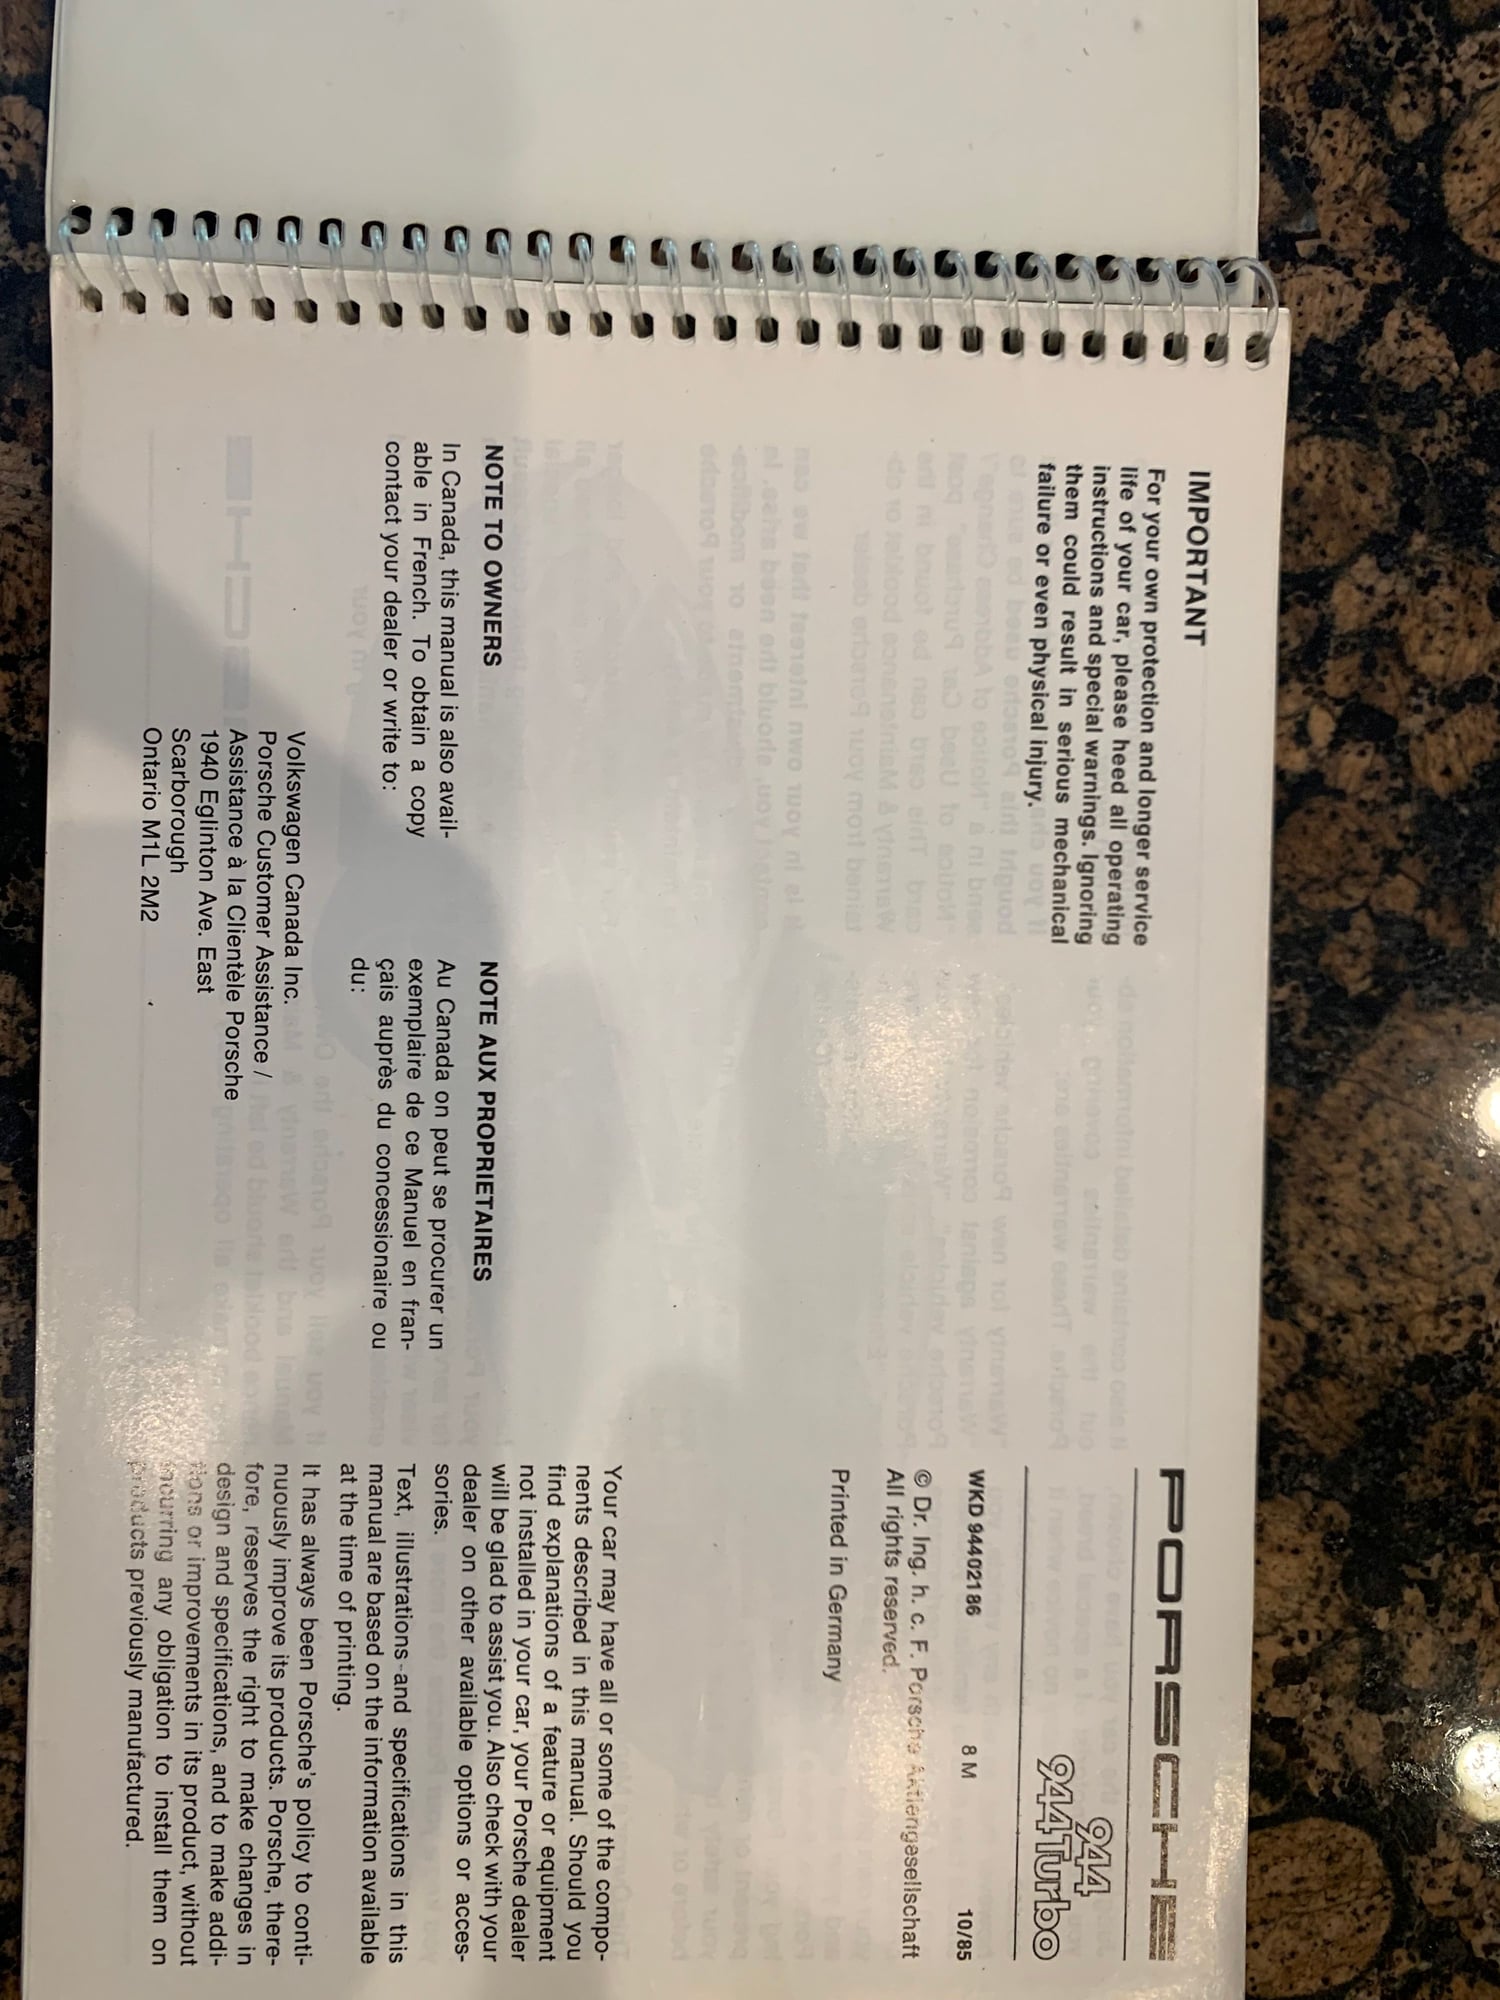 Accessories - 1986 Porsche 944 / 944 Turbo with owners manual folder - Used - 1986 Porsche 944 - Scottsdale, AZ 85259, United States